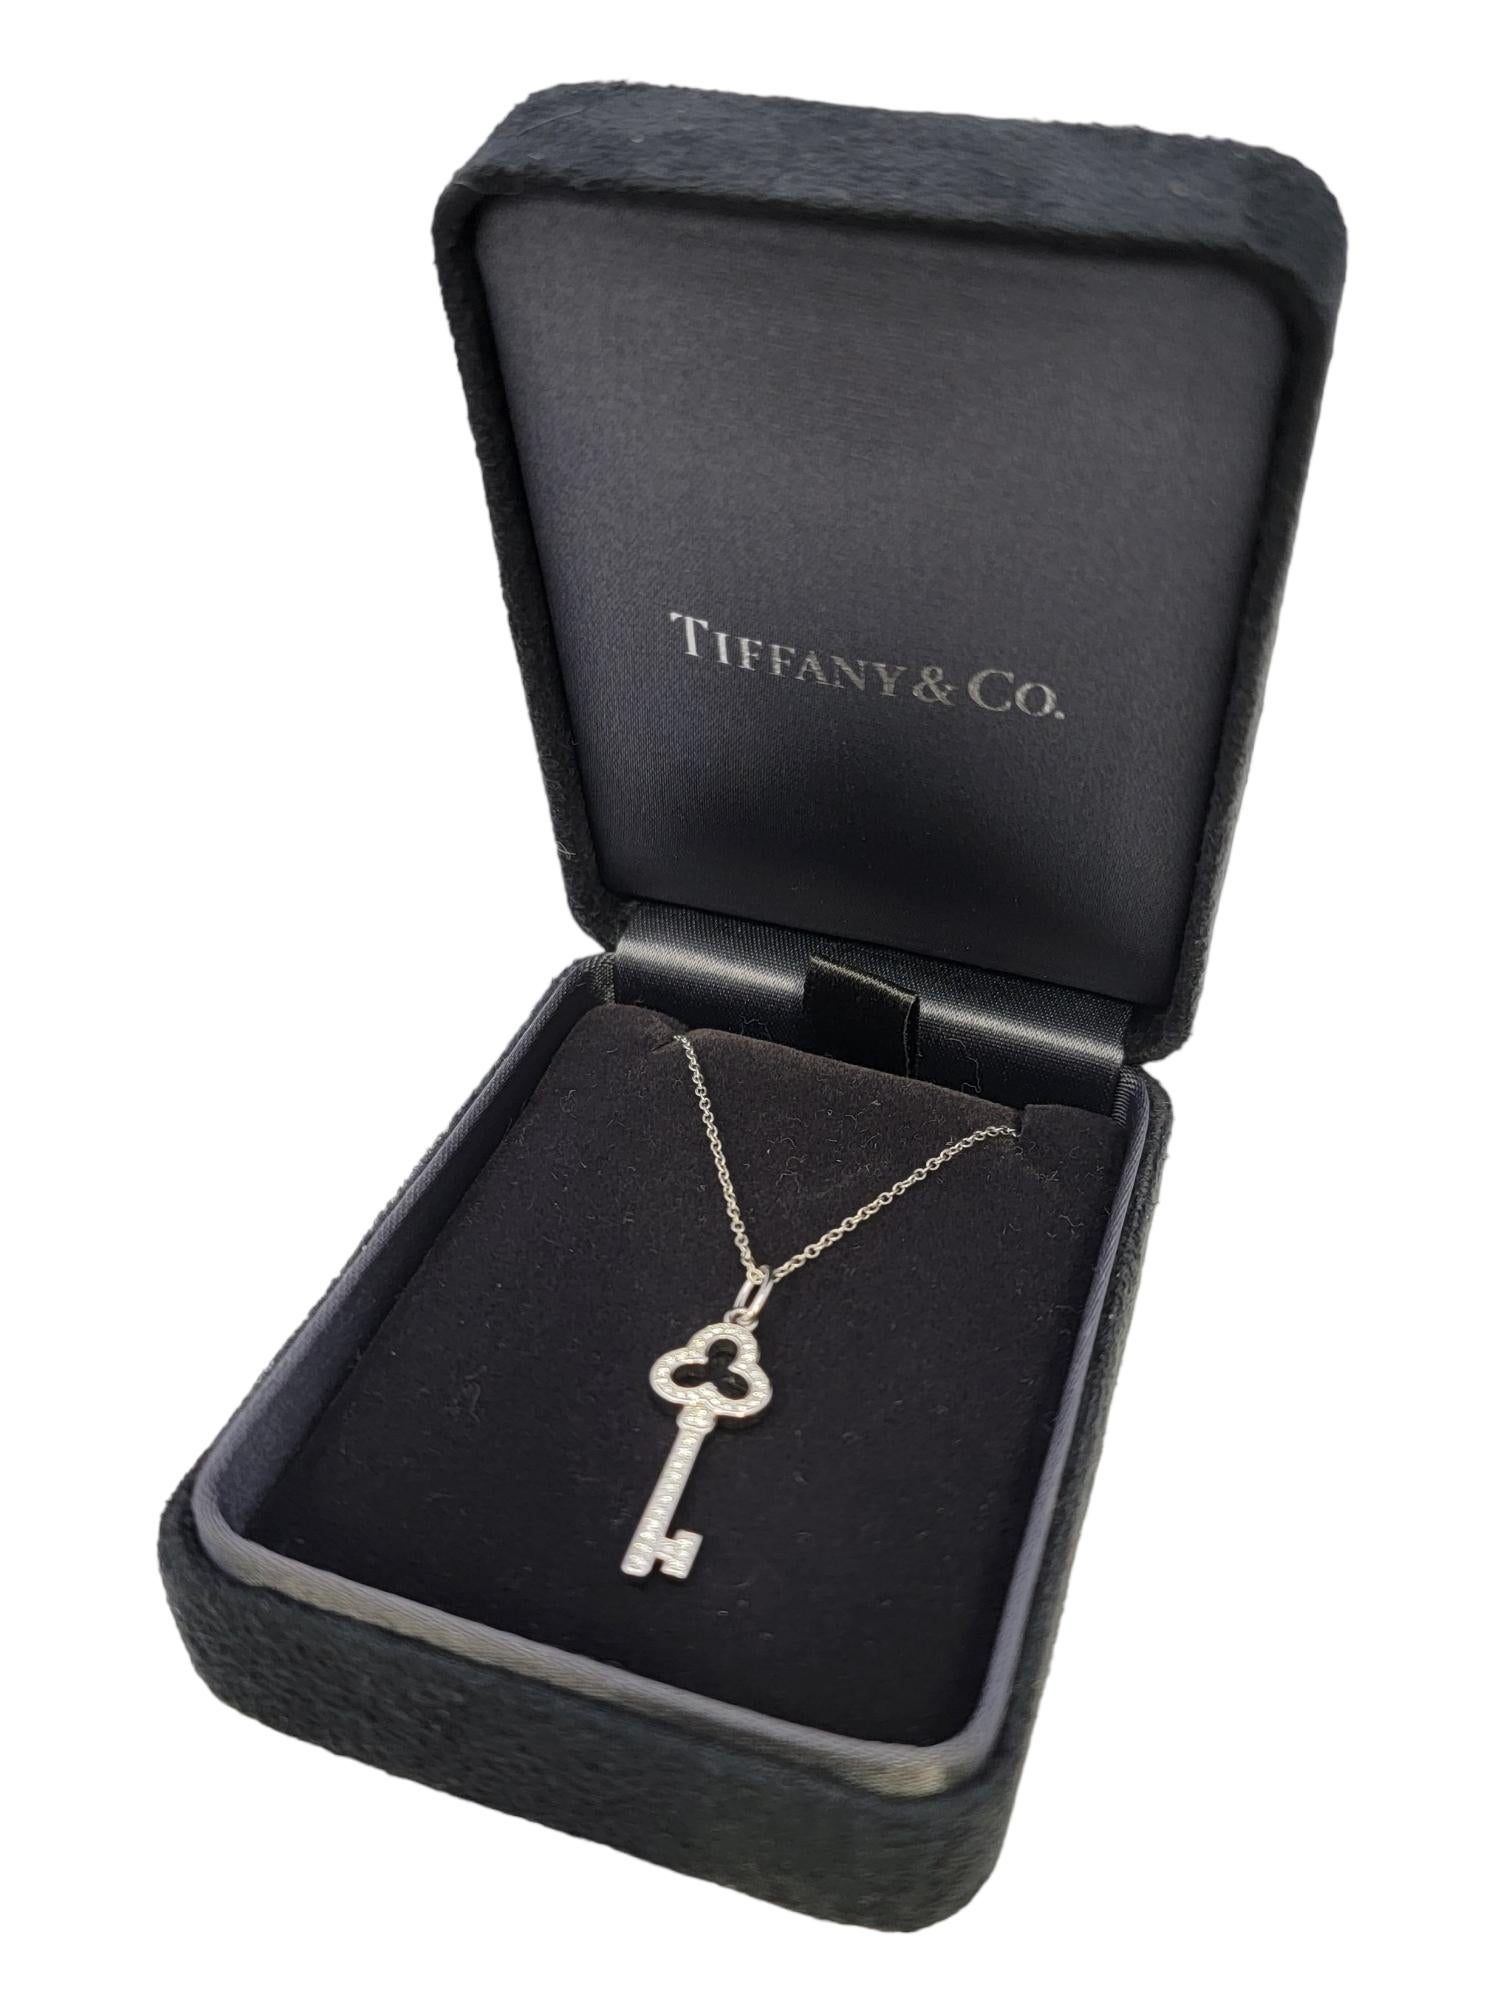 Tiffany & Co. Trefoil Key Pendant Necklace with Diamonds in 18 Karat White Gold For Sale 5